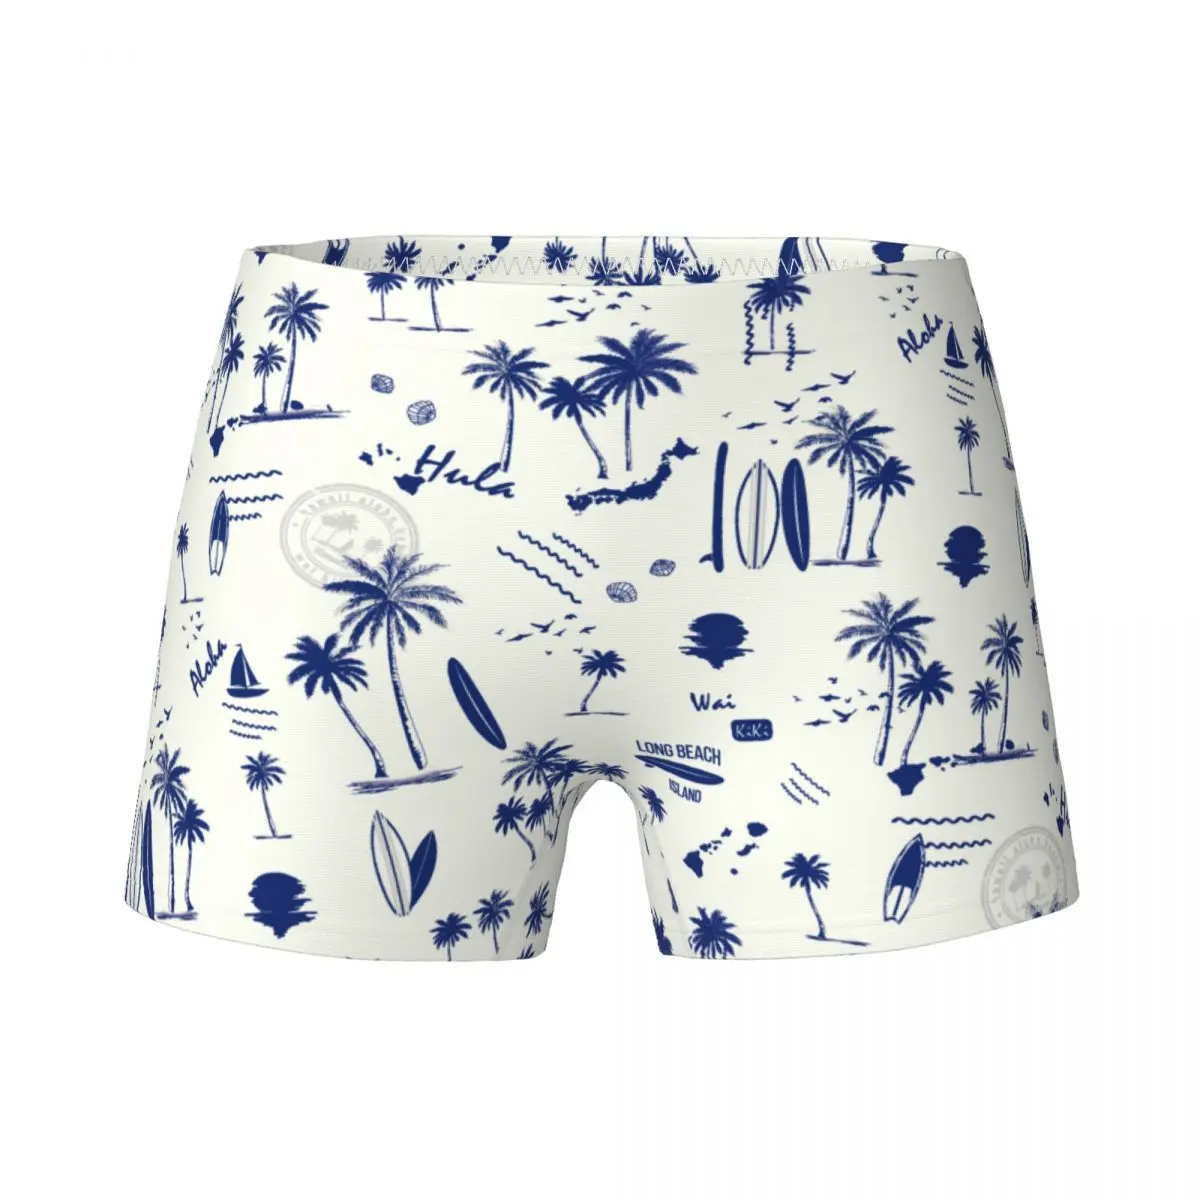 

Hawaii Style Leaf Children's Girls Underwear Kids Pretty Boxer Shorts Soft Cotton Teenagers Panties Underpants Size 4T-15T